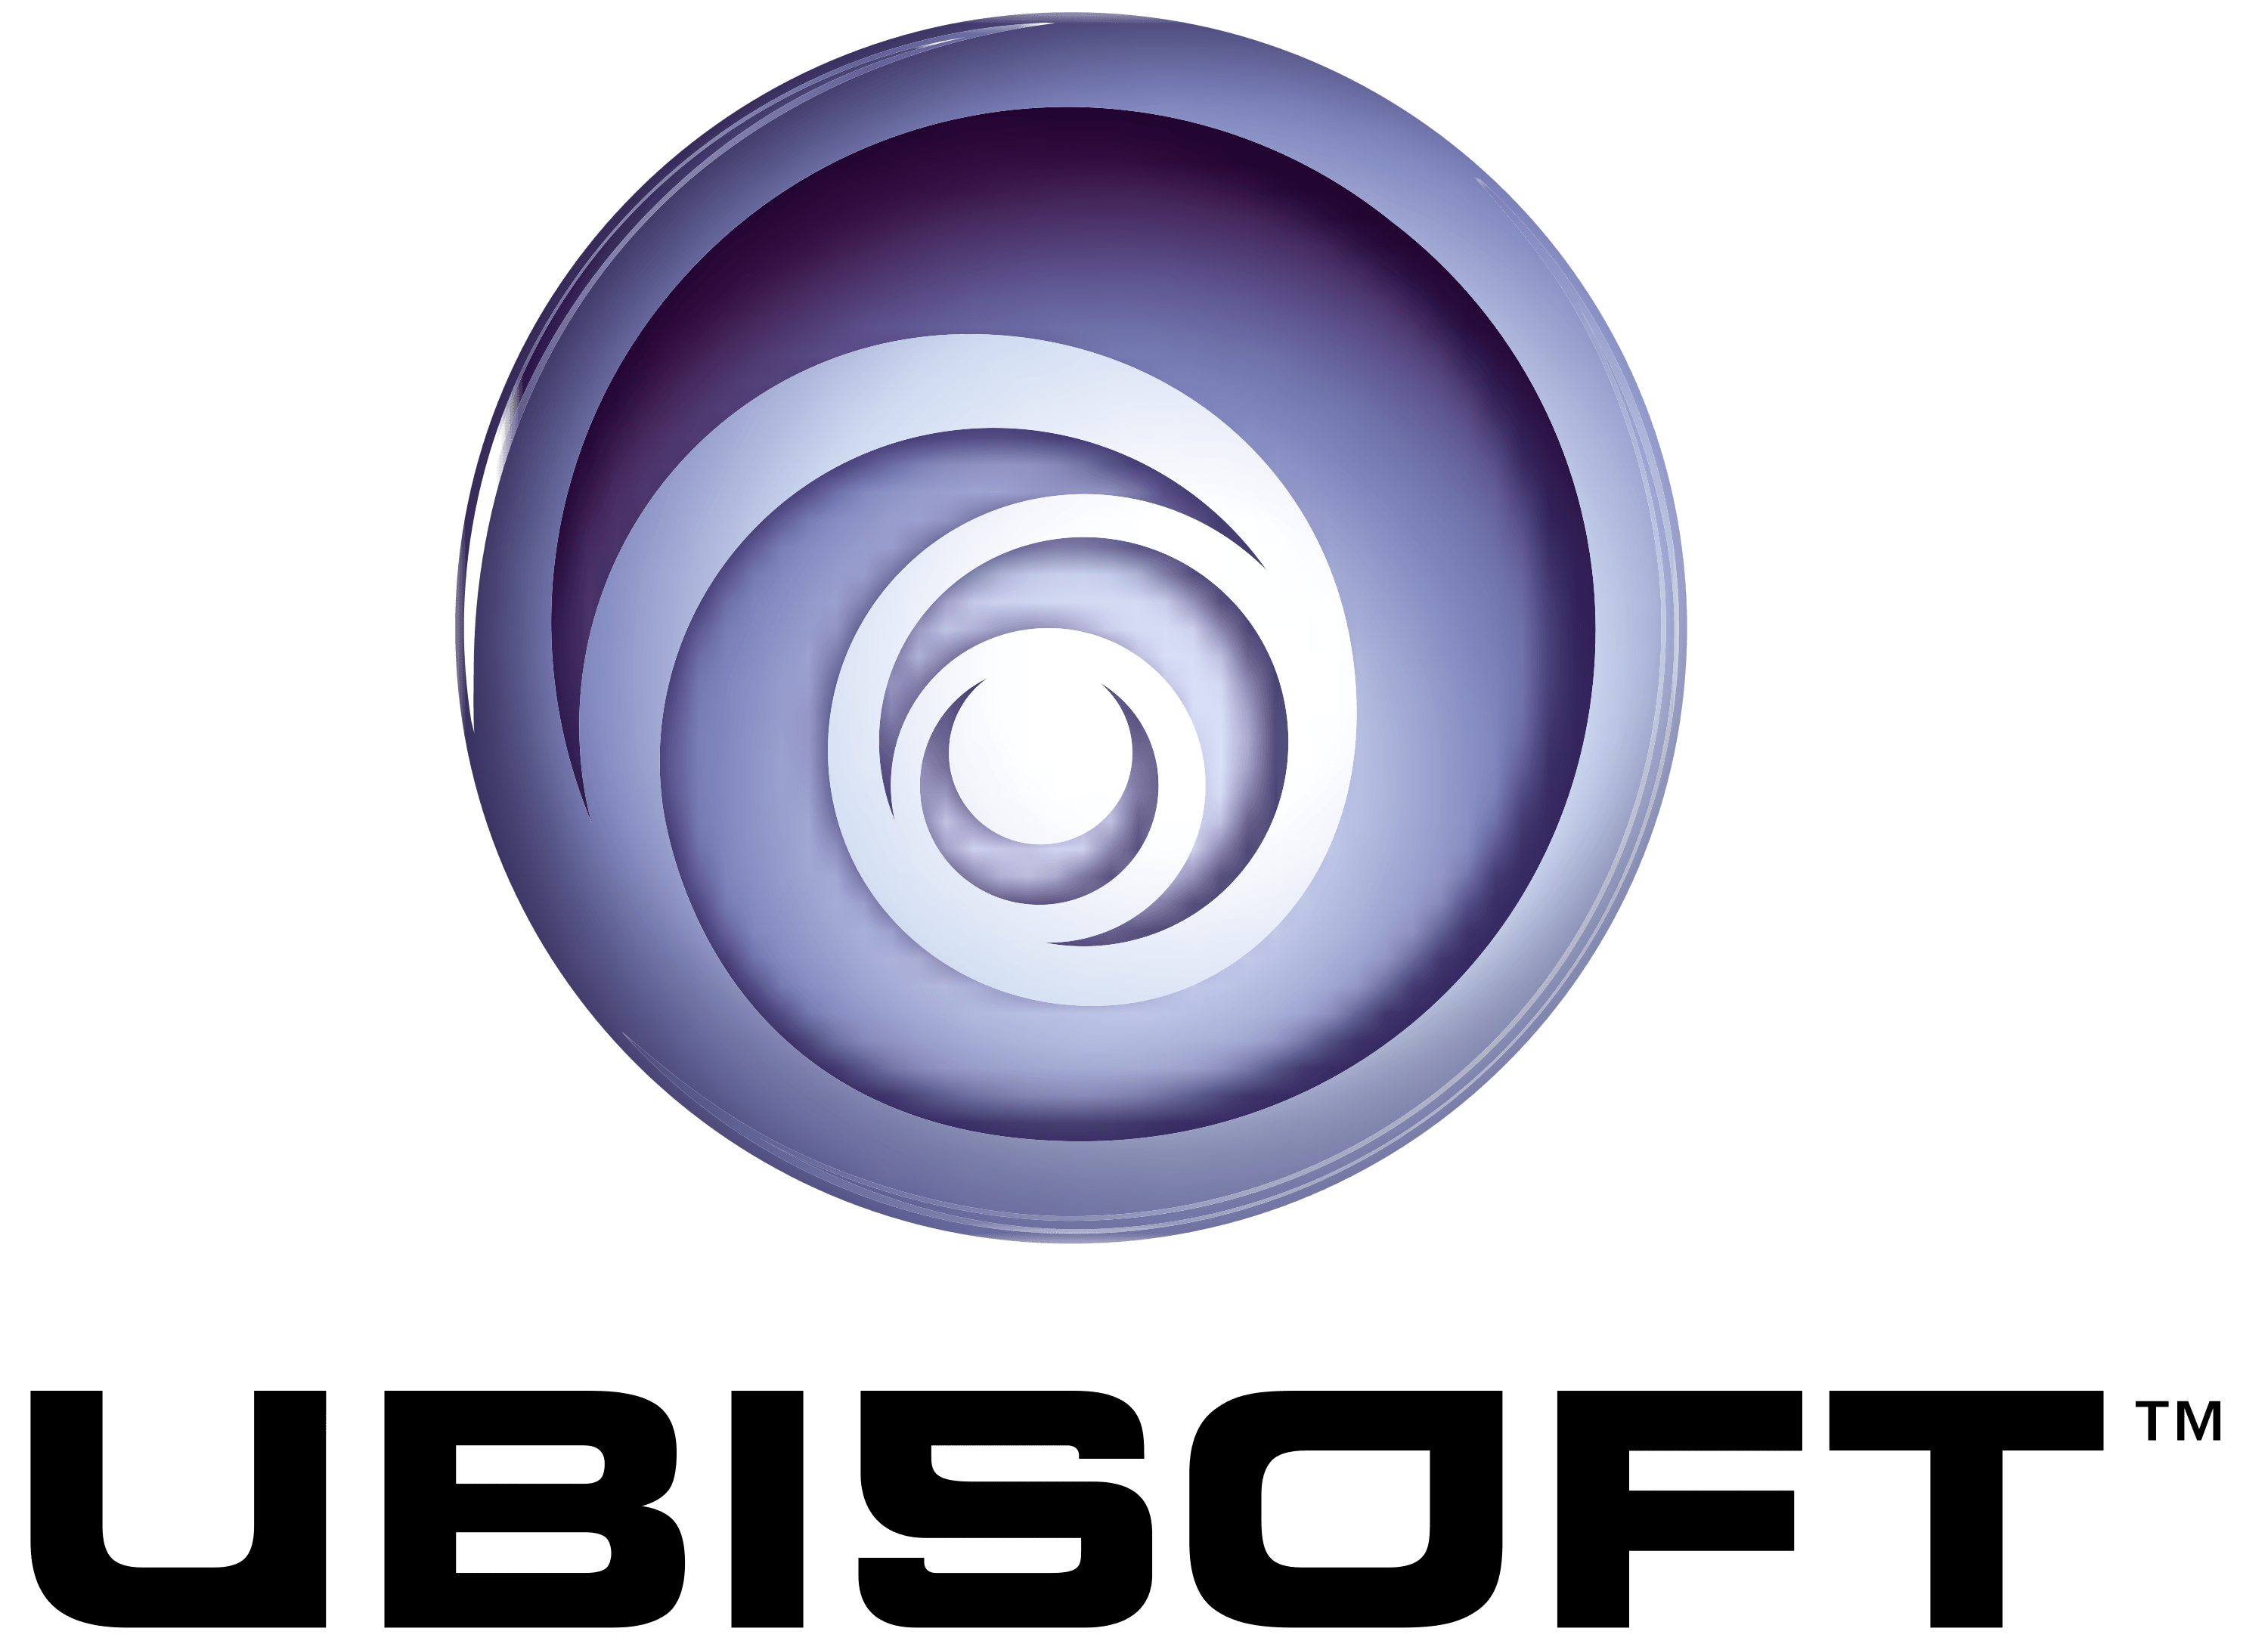 download ubisoft zombie game for free